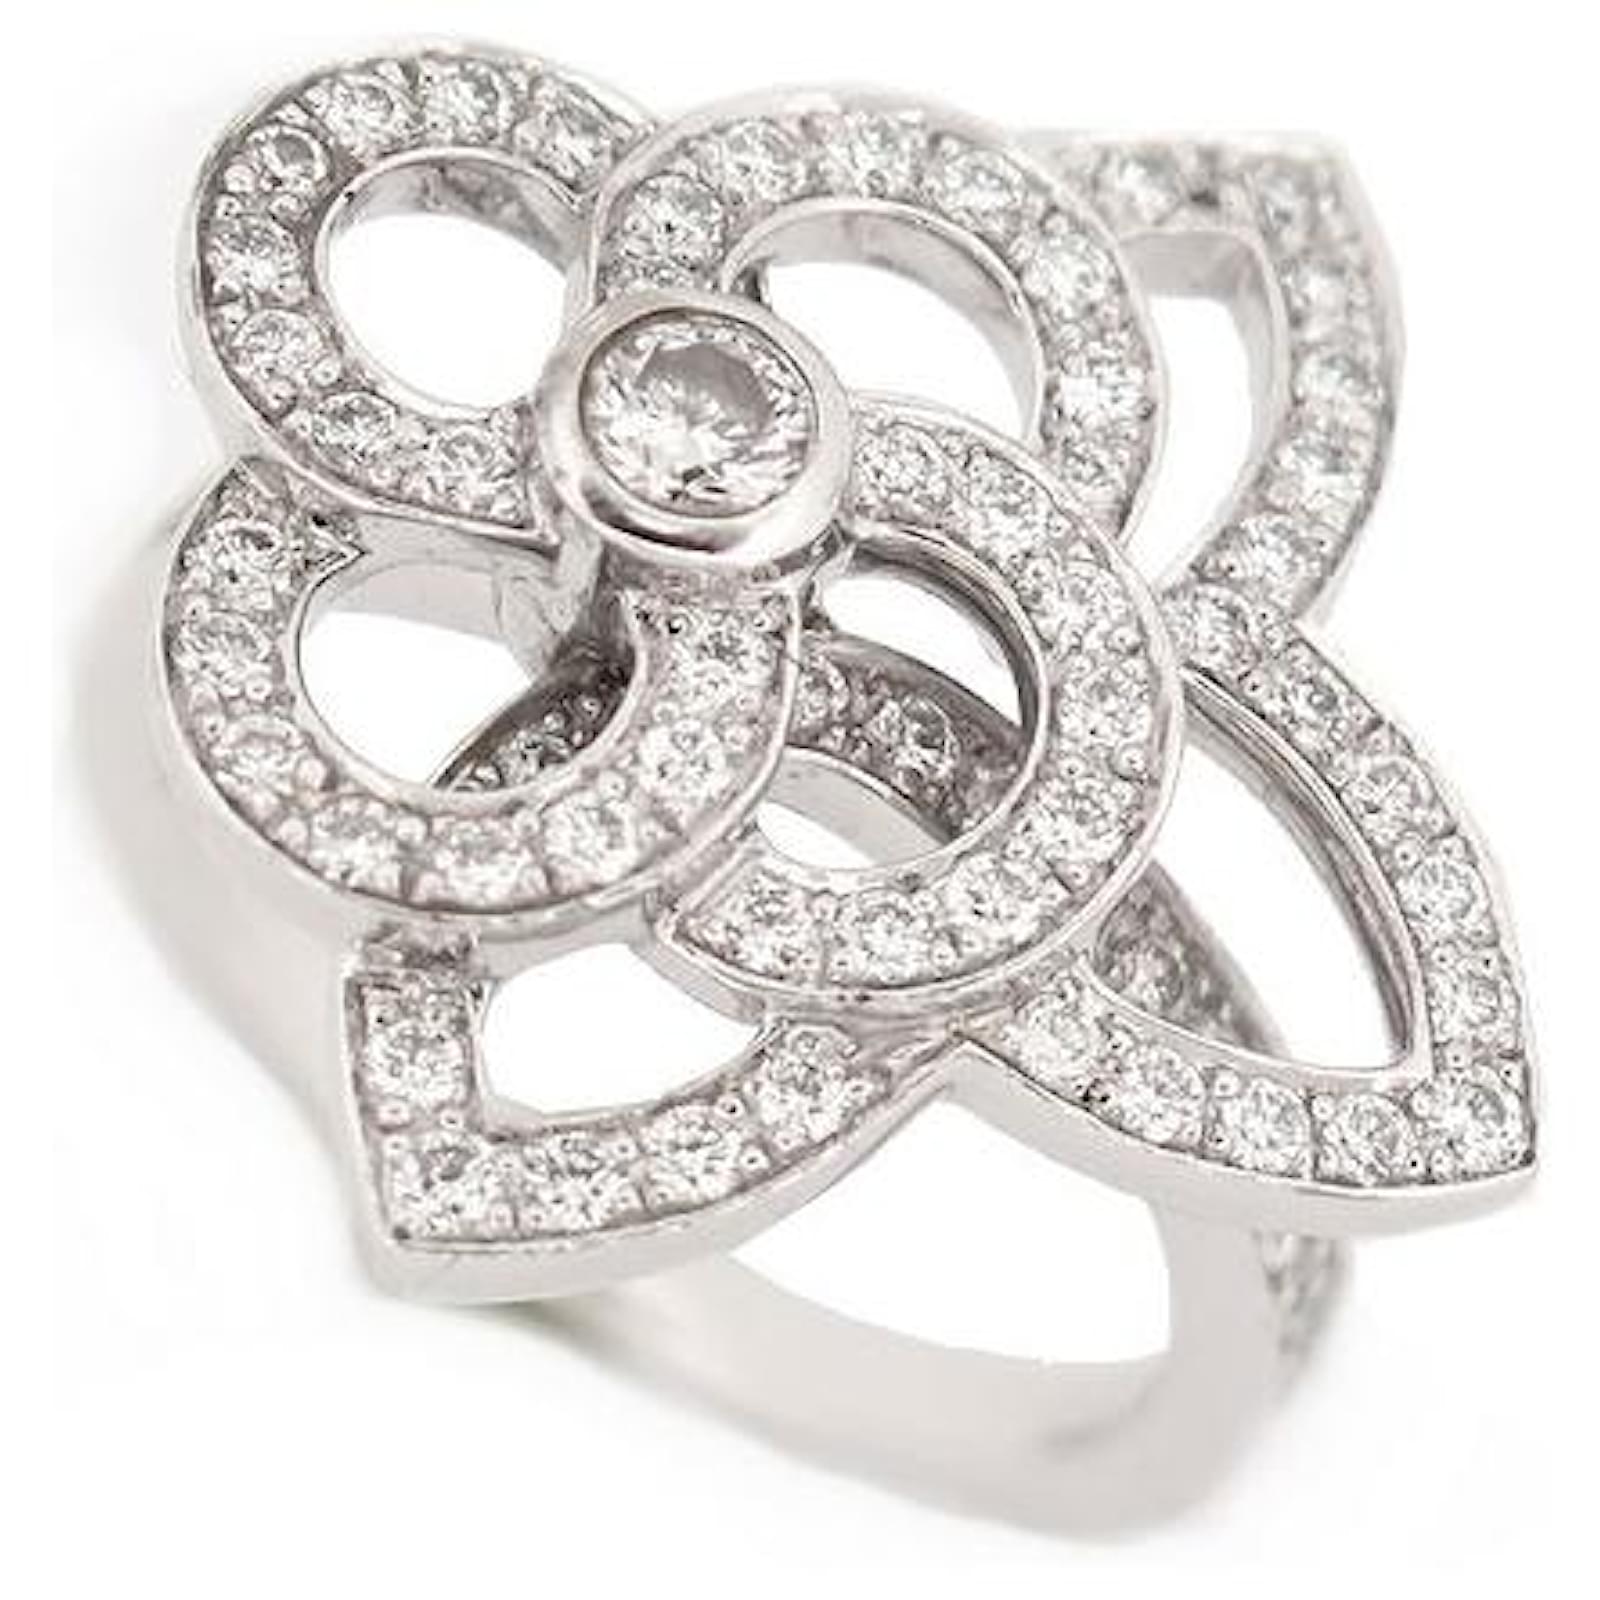 LOUIS VUITTON LES ARDENTES FLOWER RING 51 WHITE GOLD 18K AND